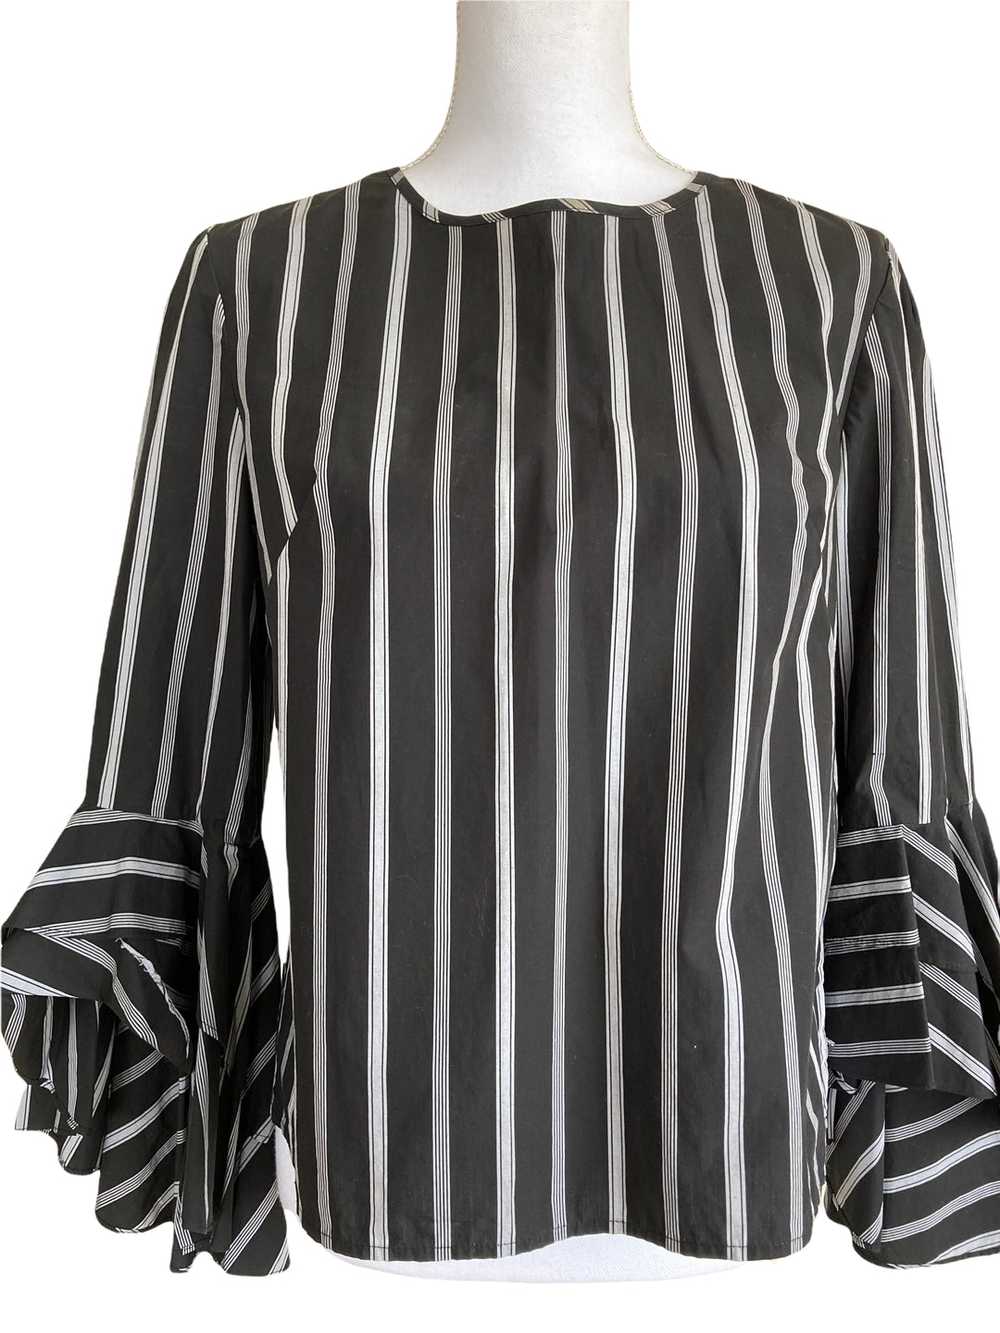 Milly Black and White Bell Sleeve Top, 8 - image 1